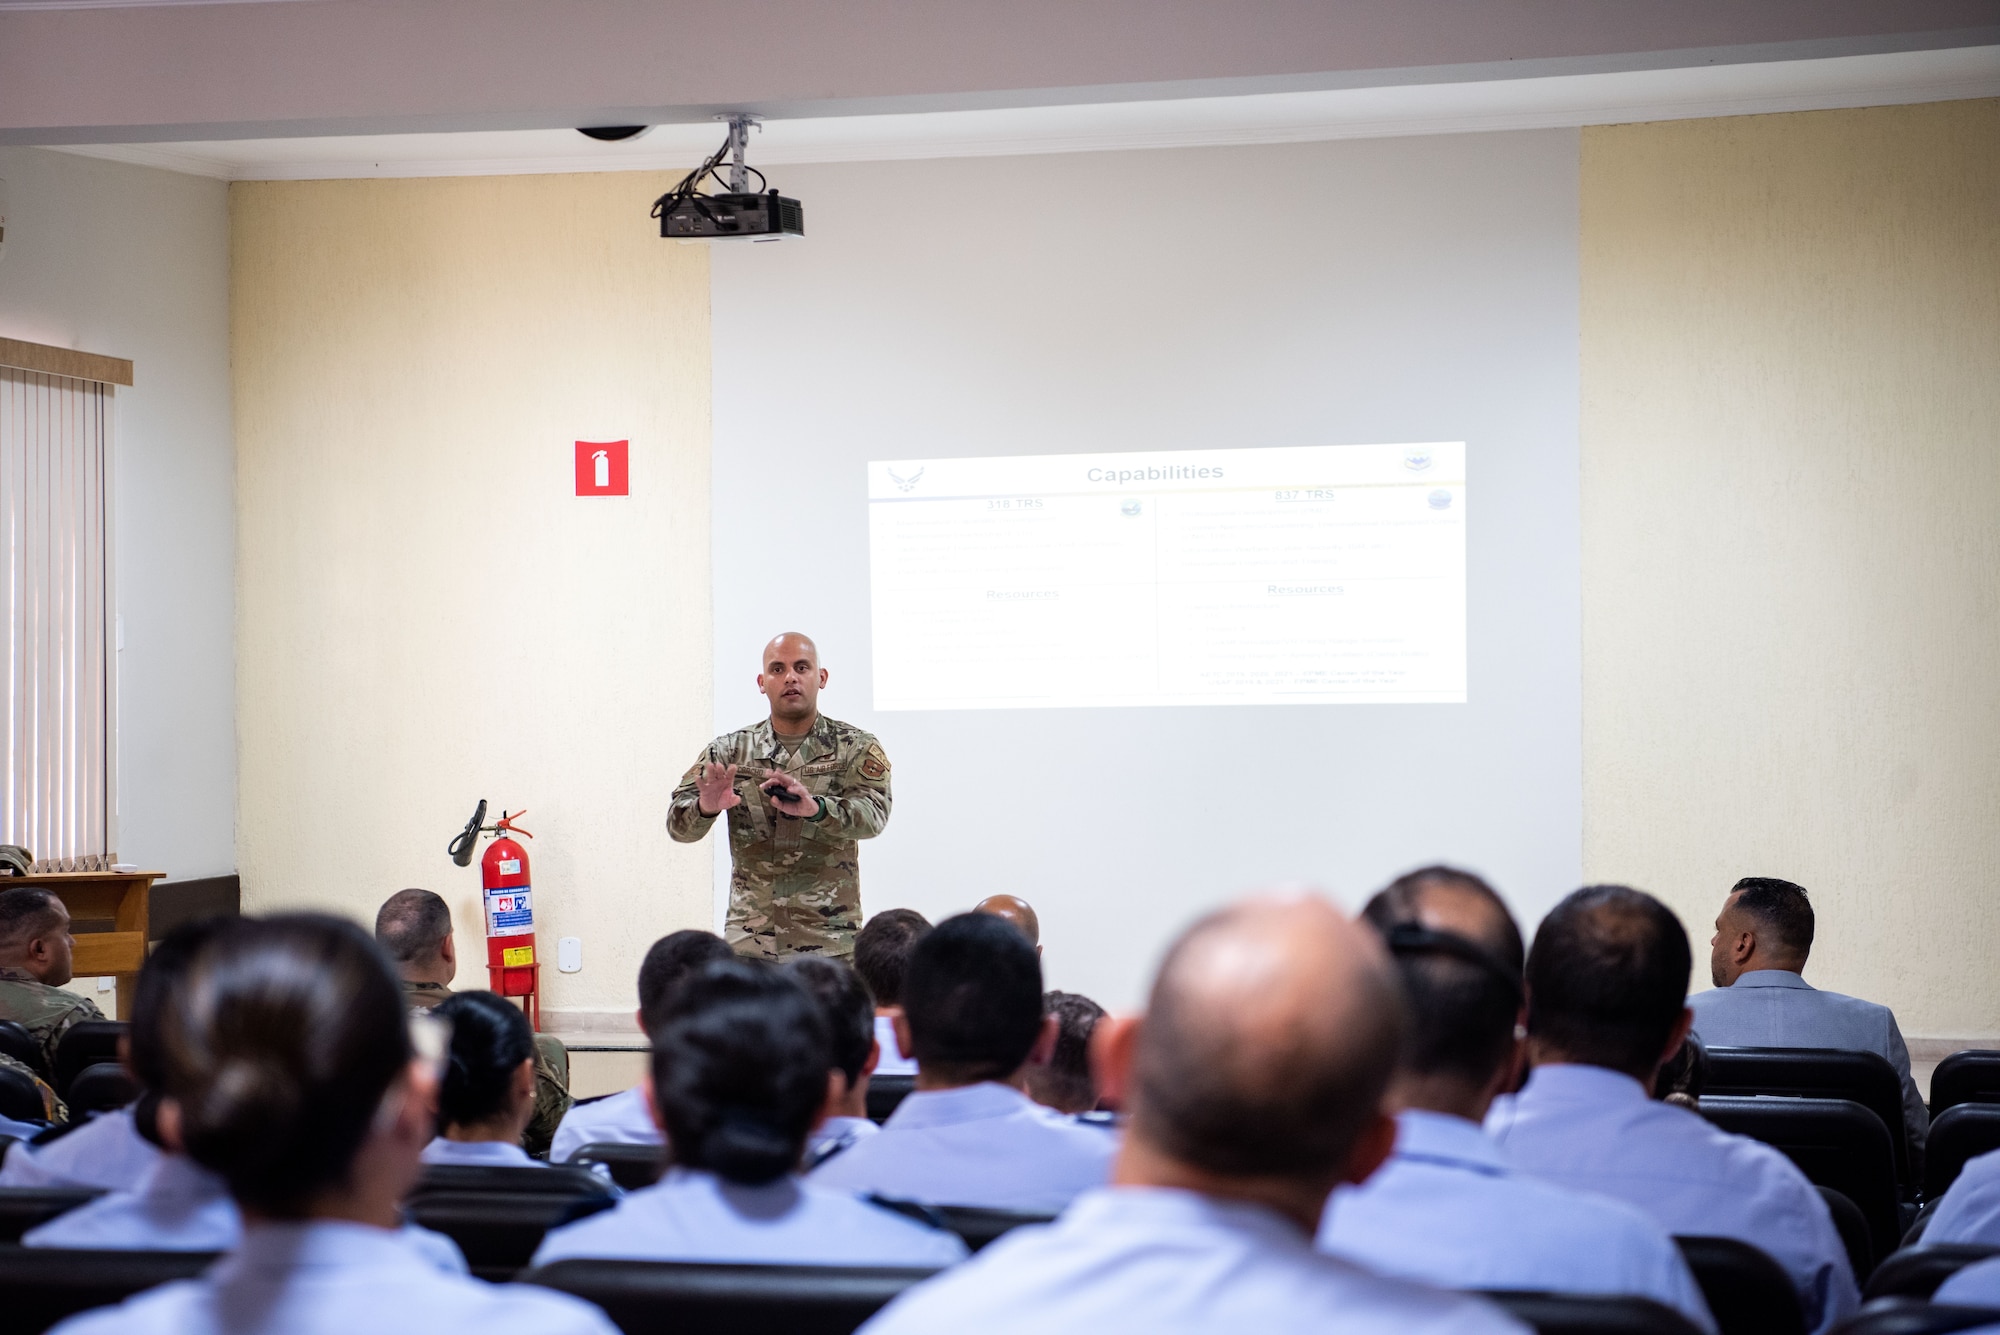 Maj. Elias Corcho, Director of Operations, of the 837th Training Squadron, gestures with his hands during a briefing at the Aeronautics Specialist School in Sao Paolo, Brazil, Aug. 22, 2023. The Inter-American Air Forces Academy led the professional development subject matter expert exchange with the Brazilian Air Force. It was the first visit of its kind in over a decade. (U.S. Air Force photo by Vanessa R. Adame)